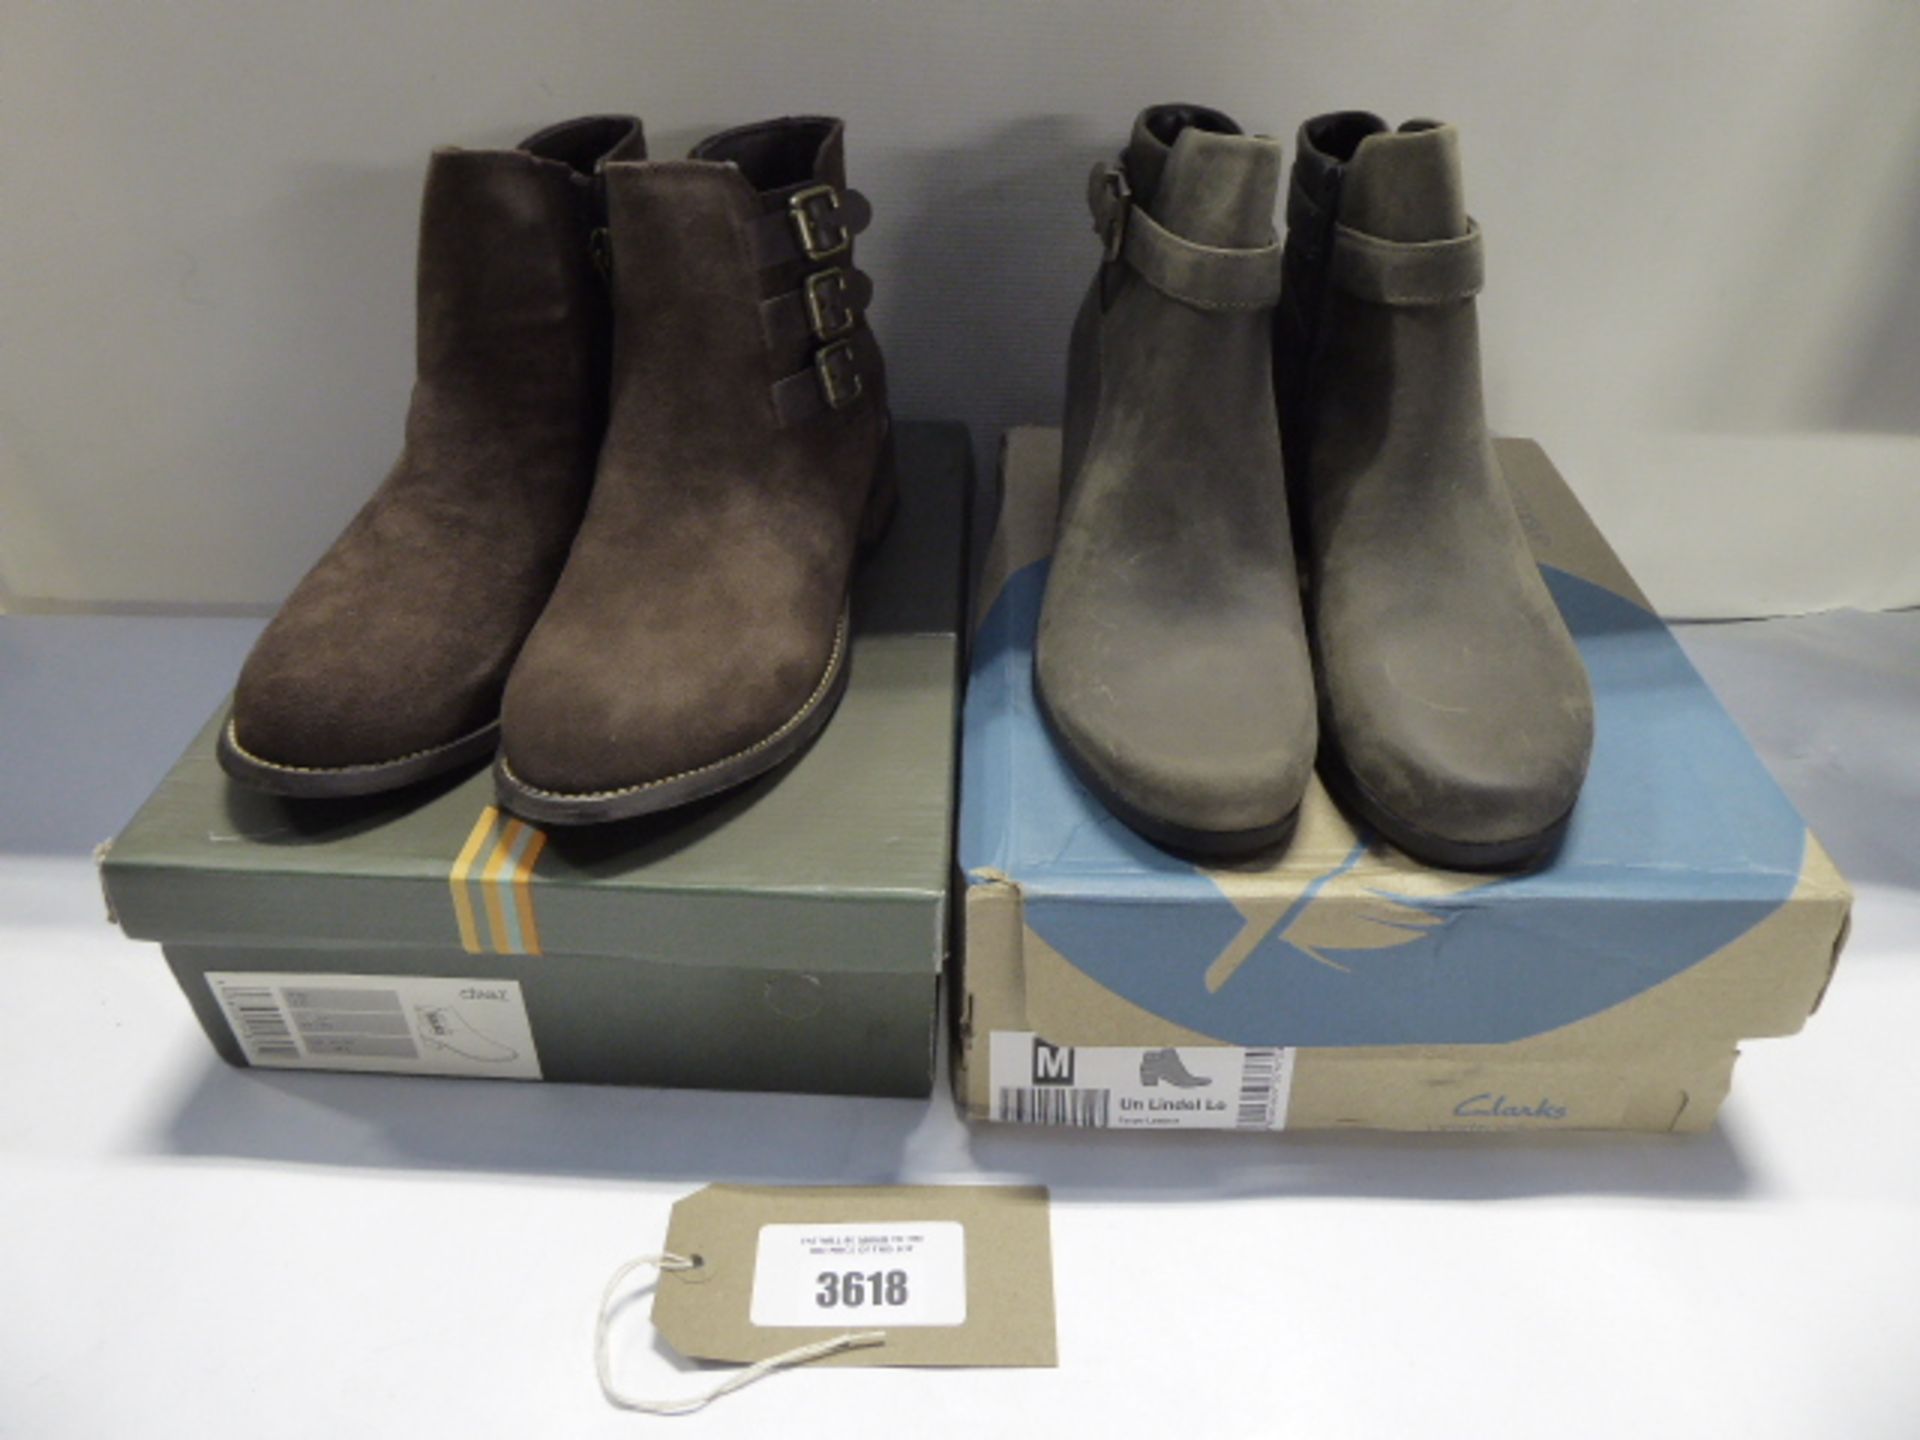 A pair of Clarks Unstructured Un Lindel taupe leather ankle boots UK 6 and a paitr of Divaz brown